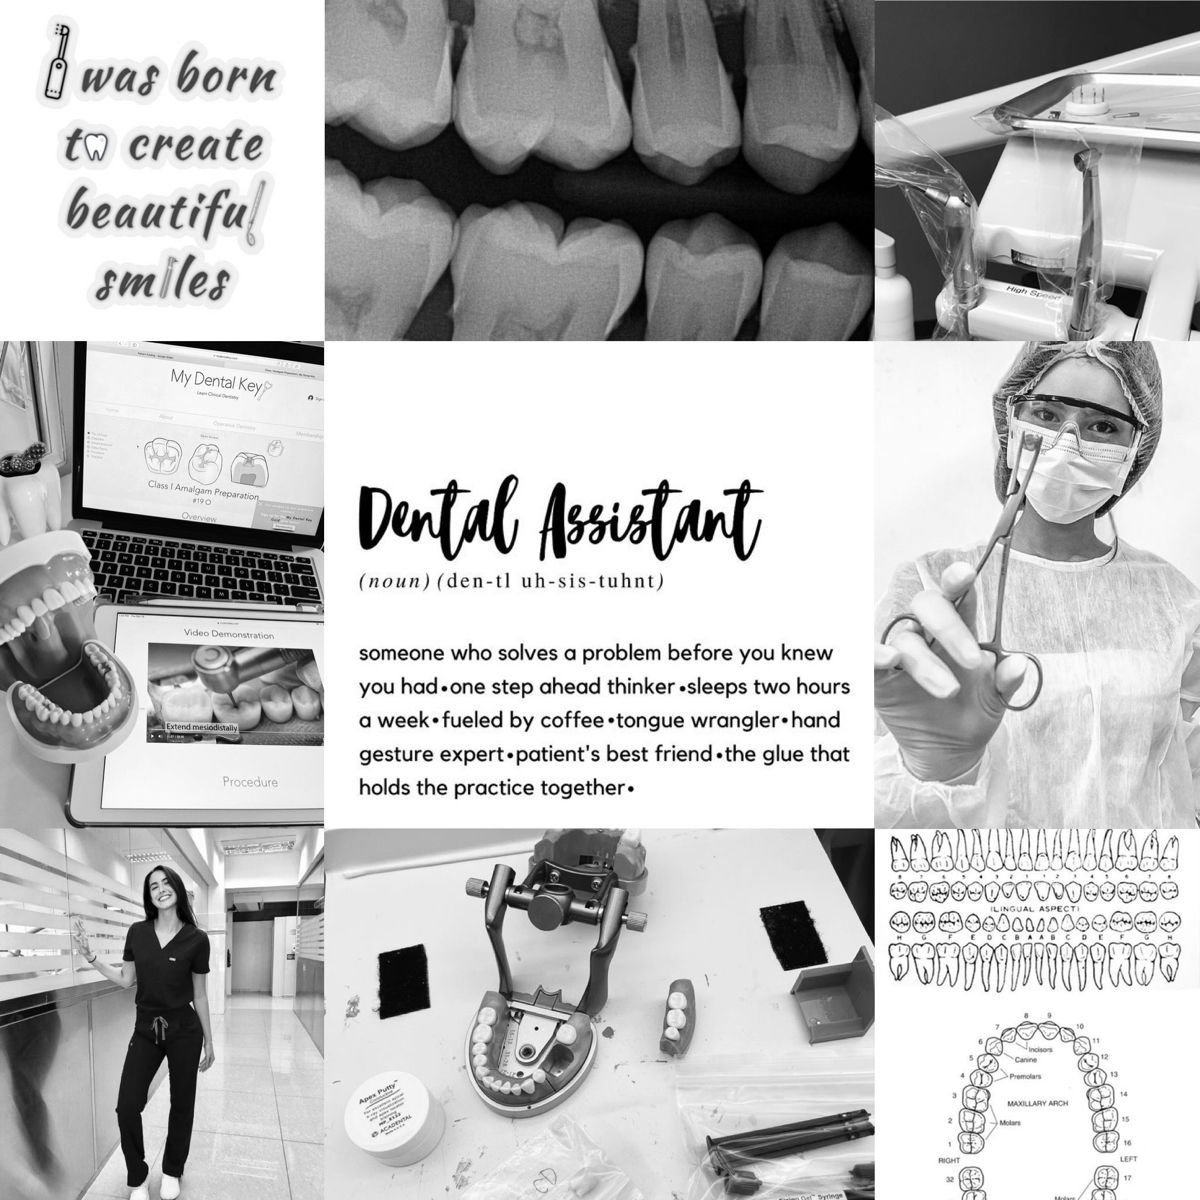 A collage of images and words describing dental assistants as someone who solves problems, is detail-oriented, a week-fueled coffee drinker, and patient friendly. - Dentist